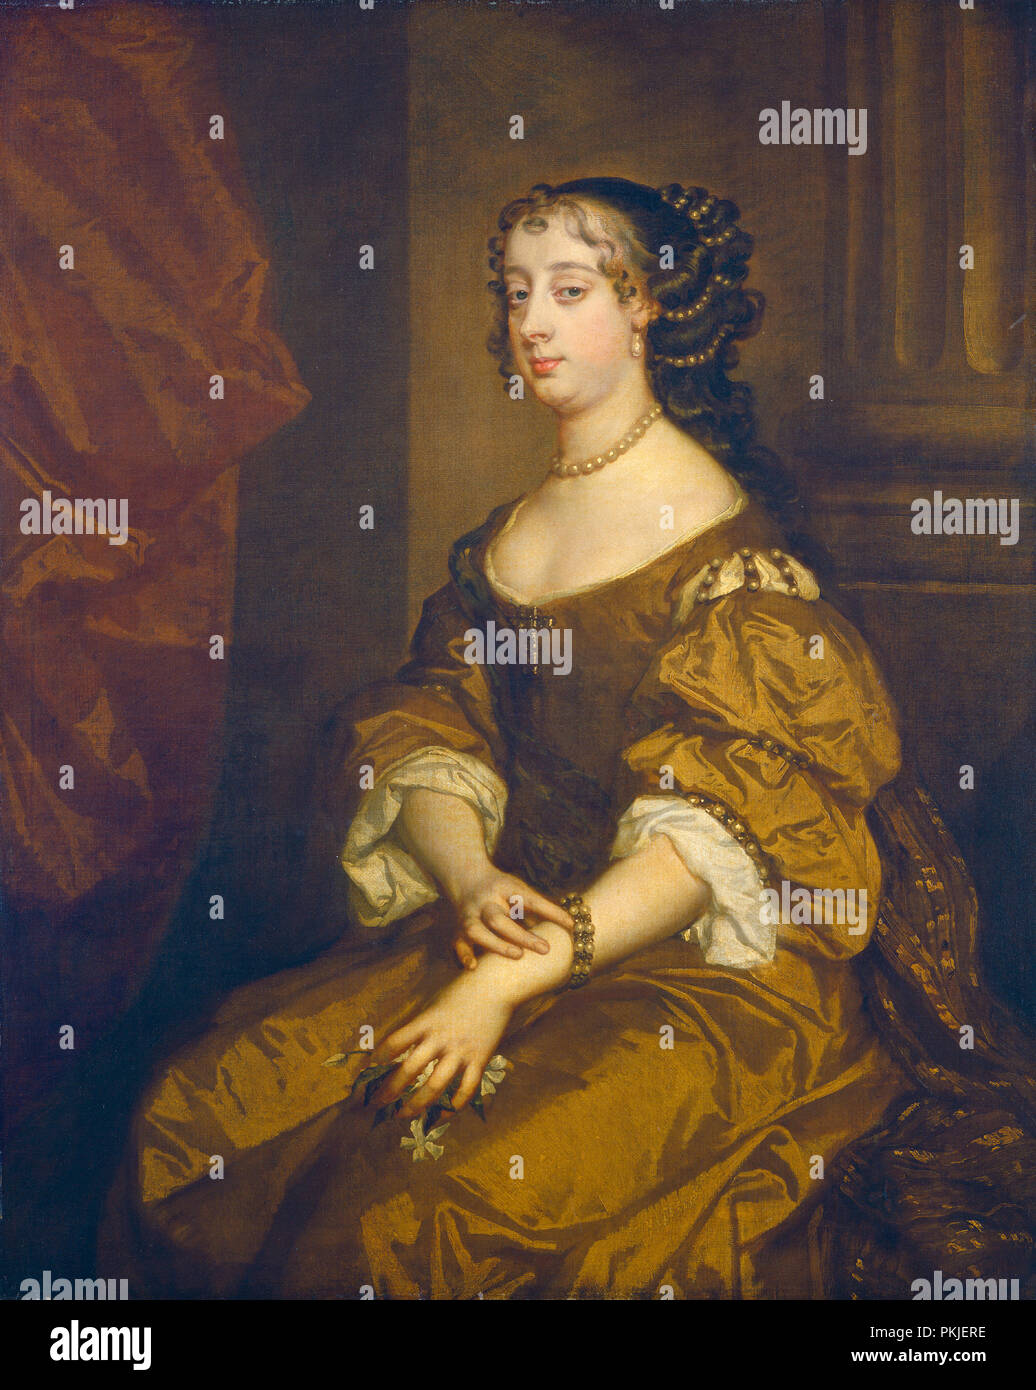 Barbara Villiers, Duchess of Cleveland. Dated: c. 1661-1665. Dimensions: overall: 126.1 x 101.5 cm (49 5/8 x 39 15/16 in.)  framed: 152.4 x 127.3 cm (60 x 50 1/8 in.). Medium: oil on canvas. Museum: National Gallery of Art, Washington DC. Author: Probably chiefly studio of Sir Peter Lely. Stock Photo